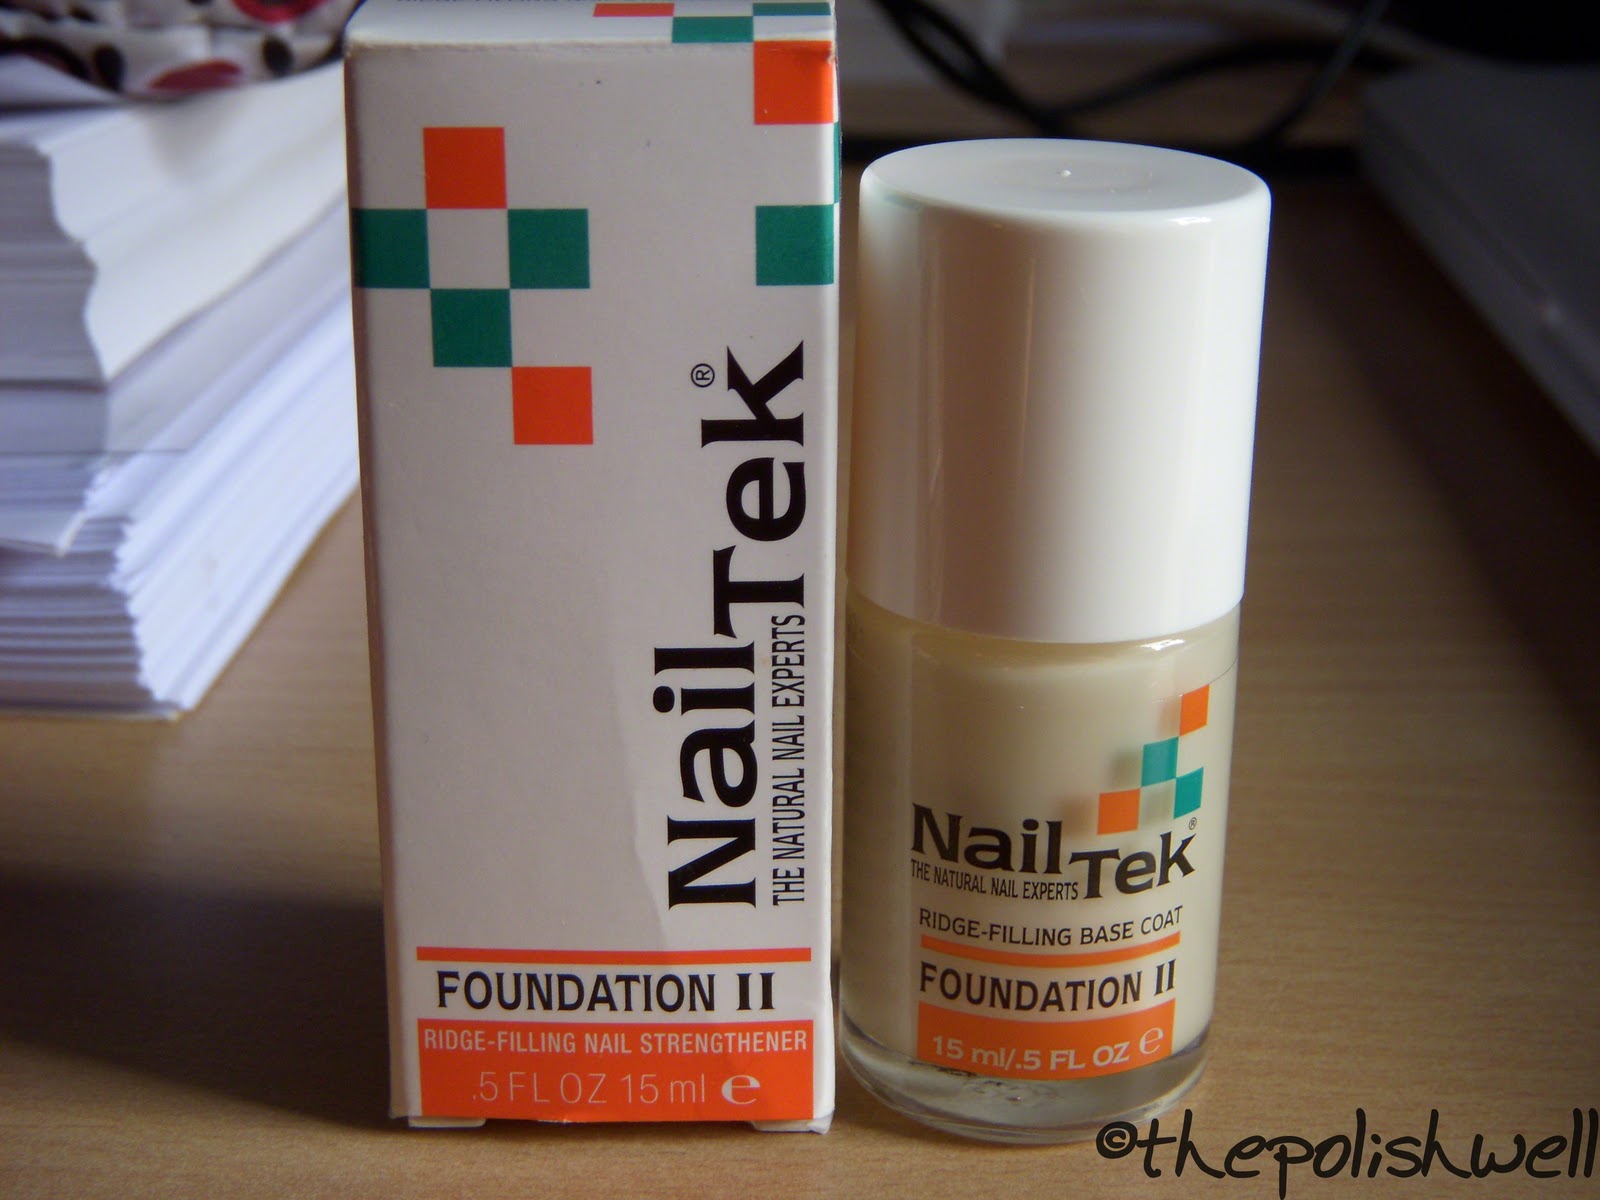 After a brief googling, I've decided to give Nail Tek's Foundation II a shot